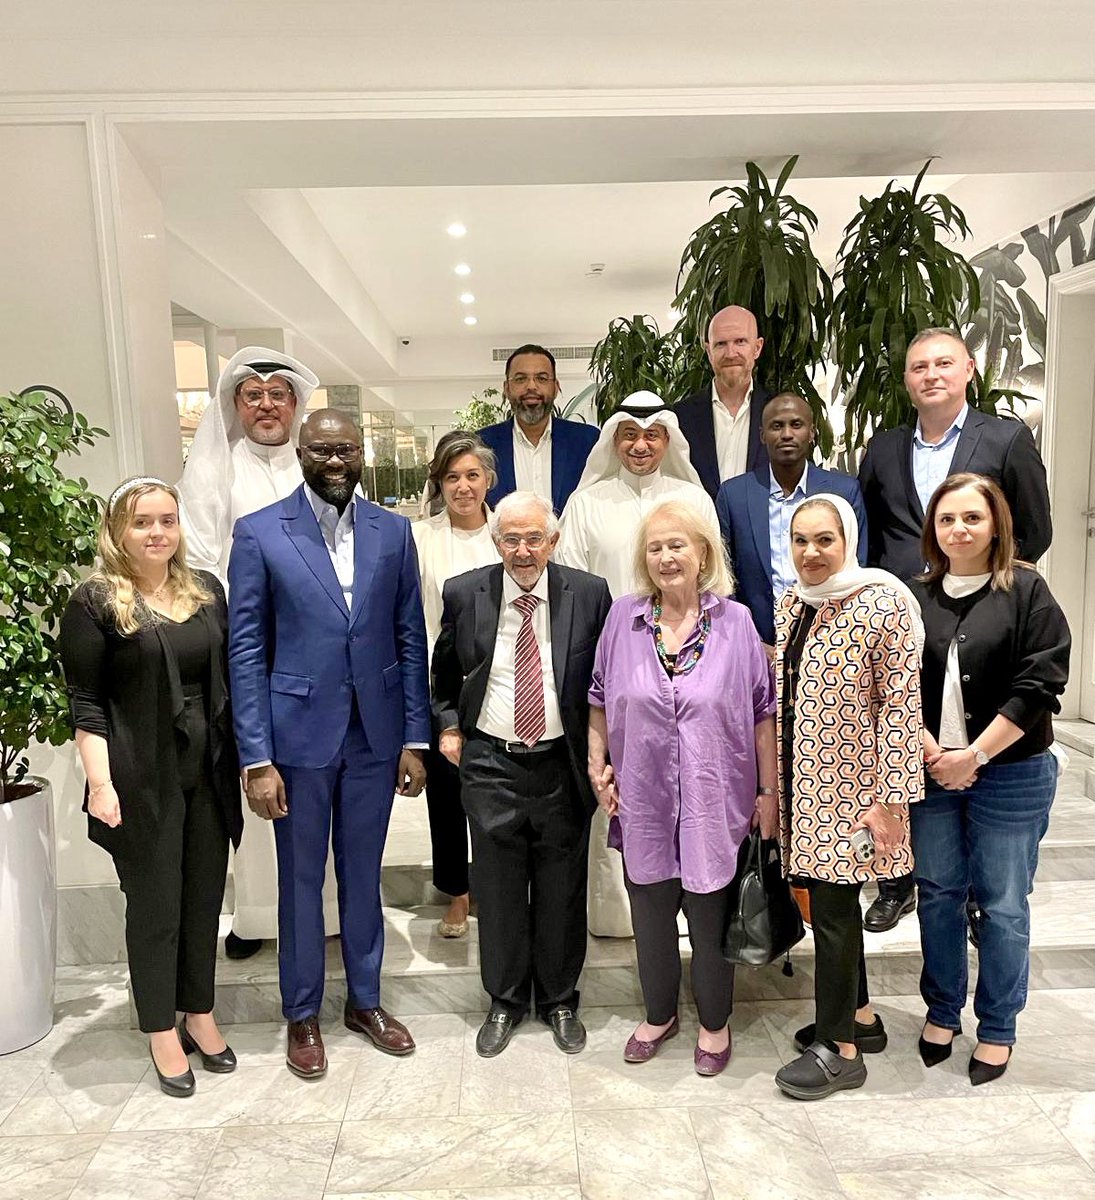 An unforgettable evening with Dr. Hilal Al Sayer, President of Kuwait Red Crescent Society, and his management team. Dr. Hilal embodies experience, wisdom, and grace—a true inspiration. Grateful for our invaluable partnership for humanity.